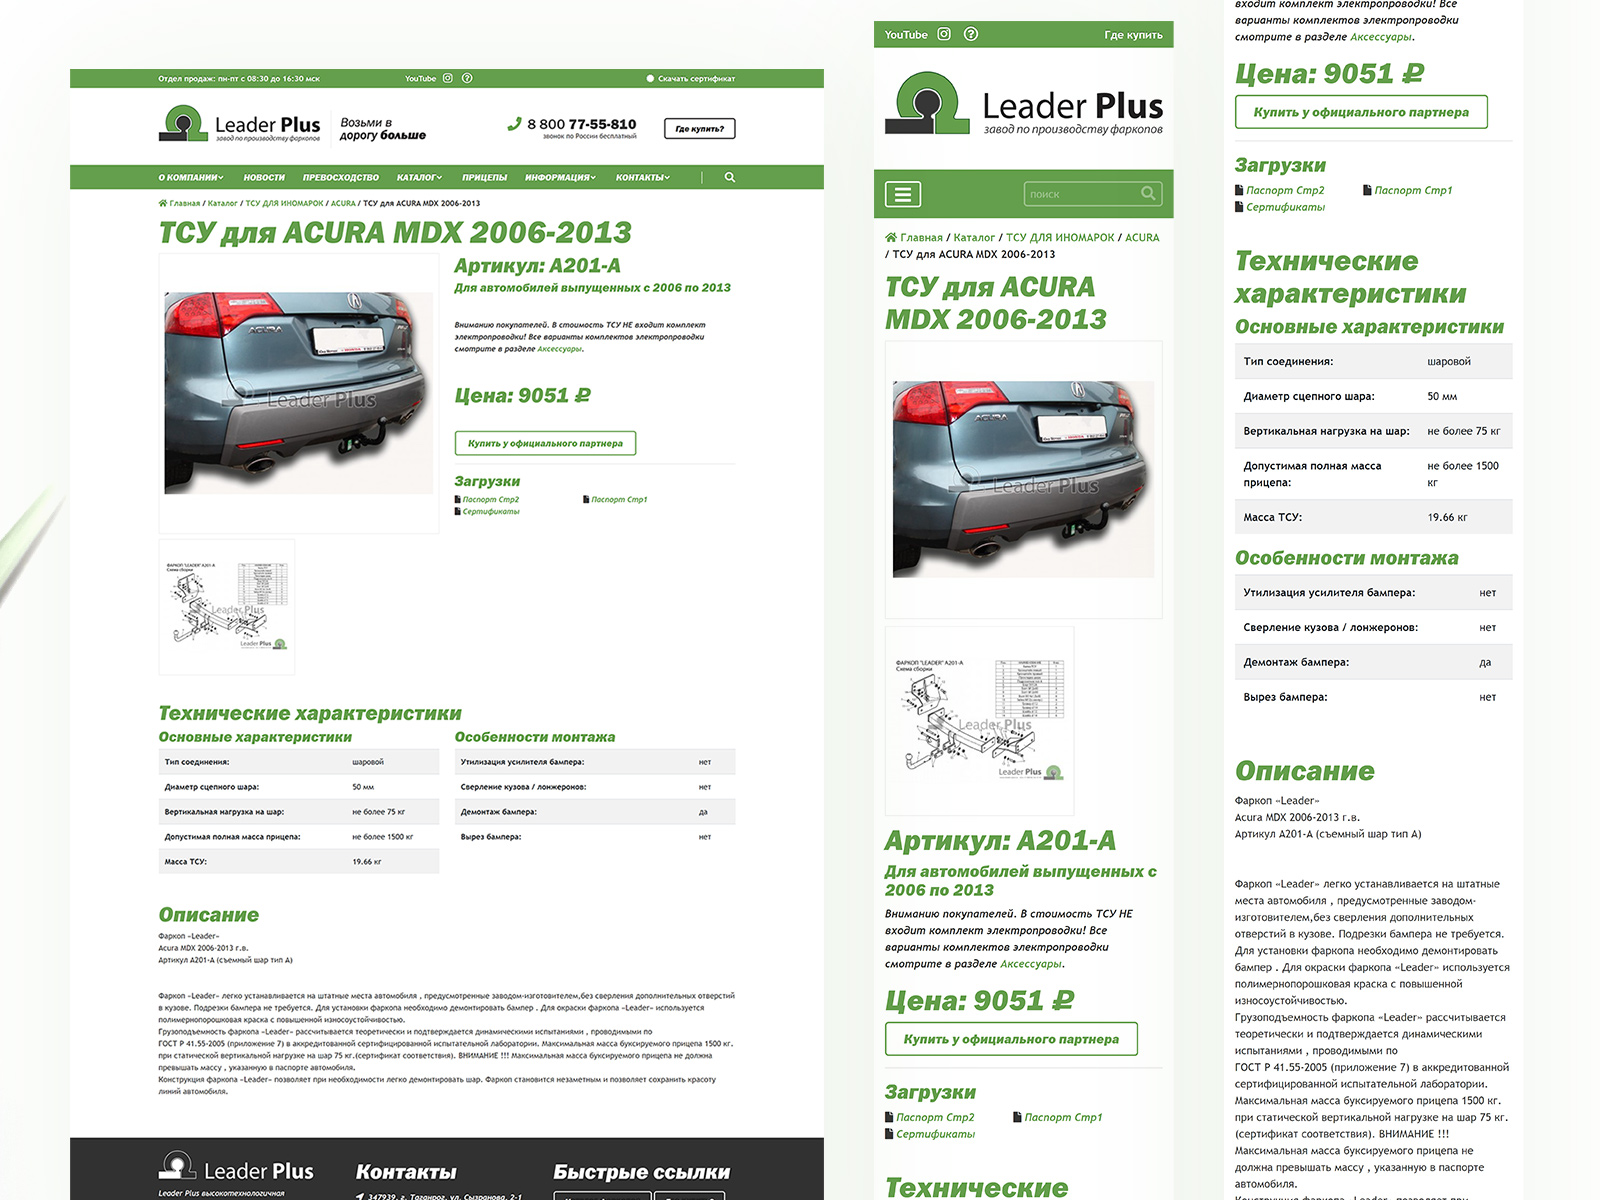 The second version of the Leader Plus towbar factory website